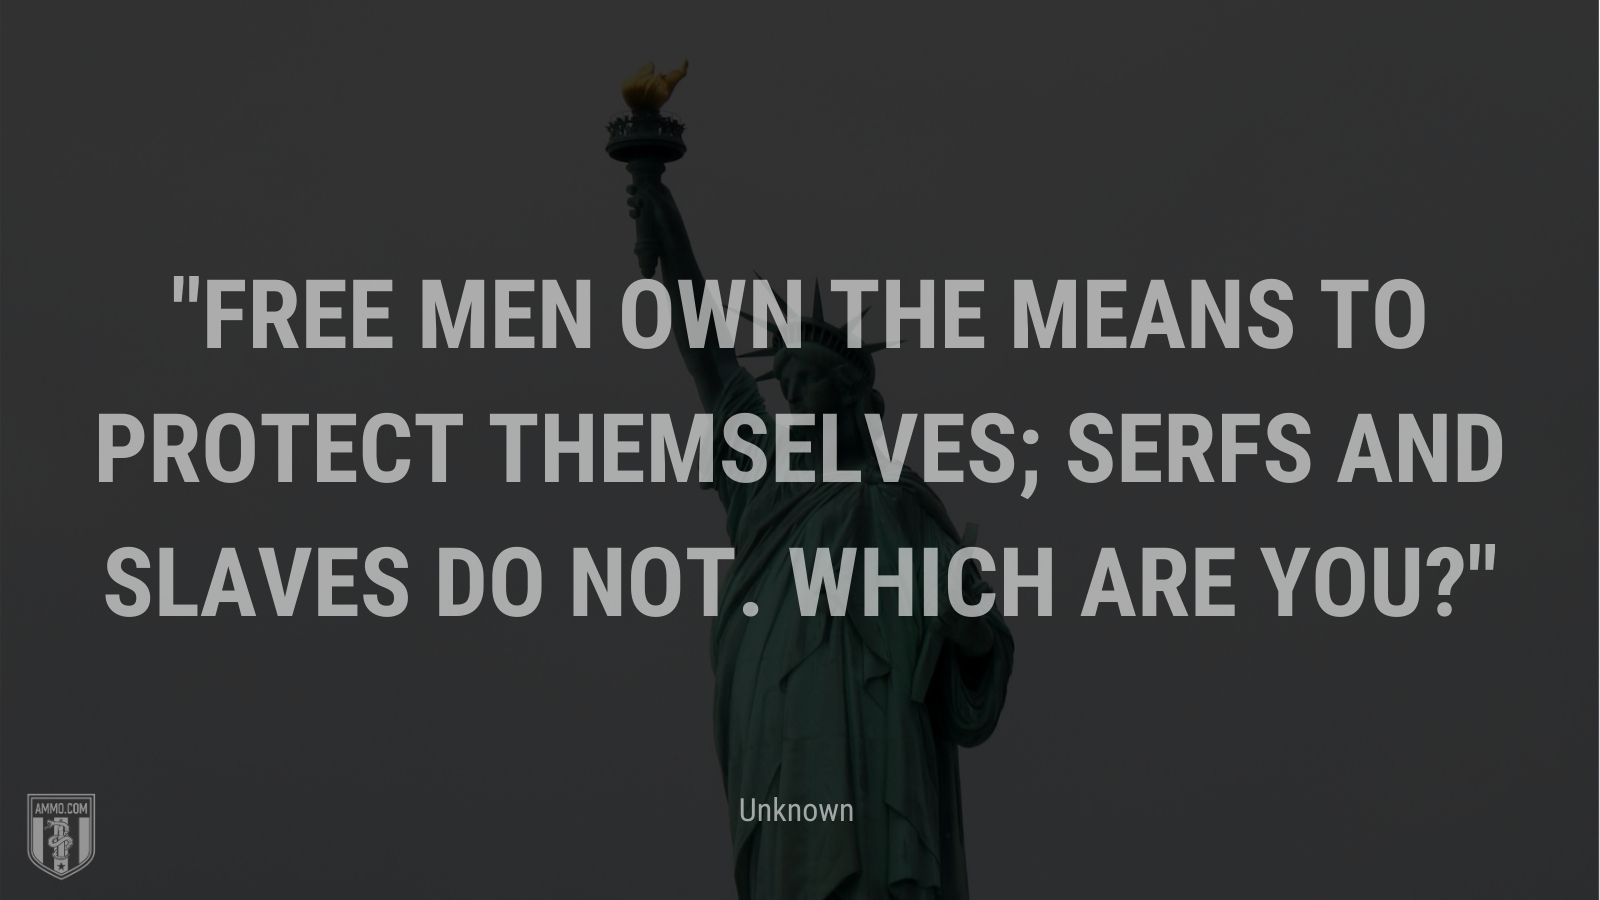 “Free men own the means to protect themselves; serfs and slaves do not. Which are you?” - Unknown